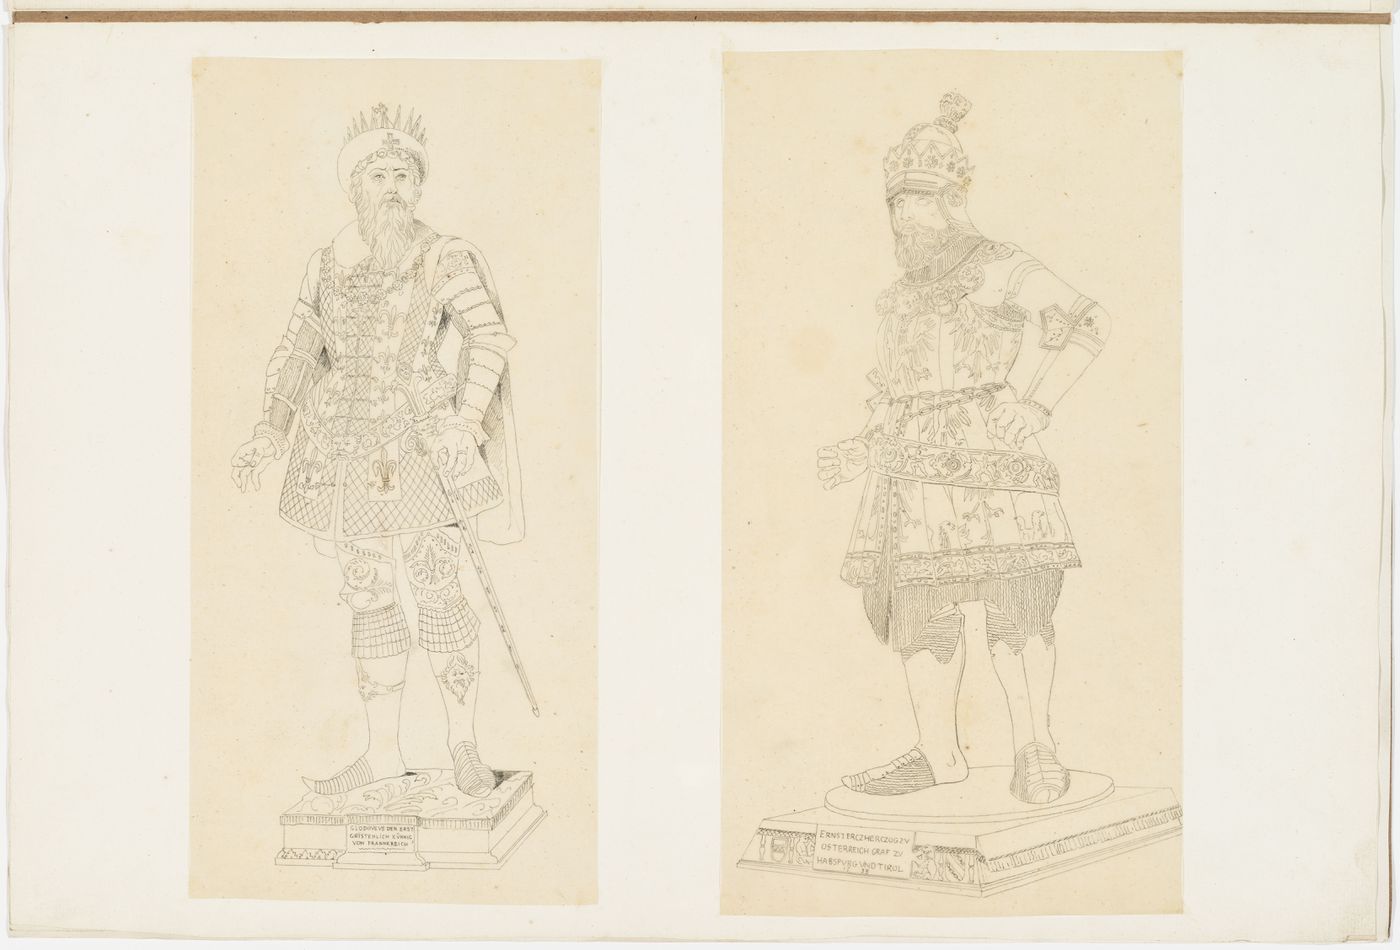 Drawings of statues of Clovis, the first Christian King of the Franks, and Ernst the Iron, Duke of Austria, Count of Habsburg and Tirol from the cenotaph of Maximilian I in the Hofkirche, Innsbruck